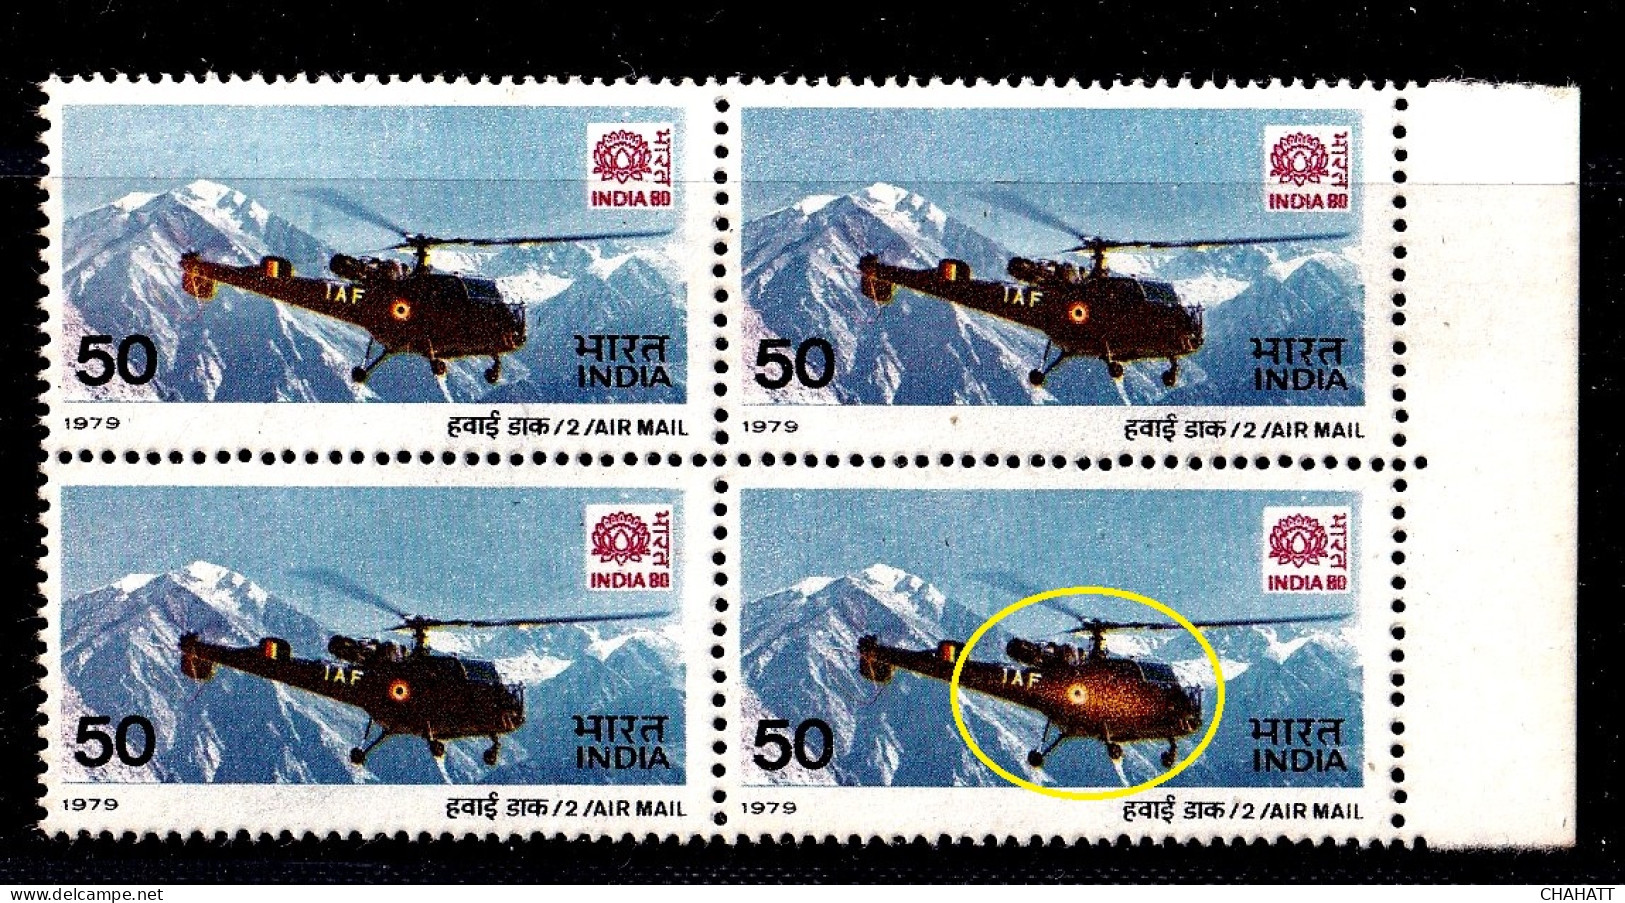 INDIA-1979- AIRMAIL-HELICOPTERS-50p- ERROR-COLOR VARIETY - BLOCK OF 4- H2-25 - Plaatfouten En Curiosa